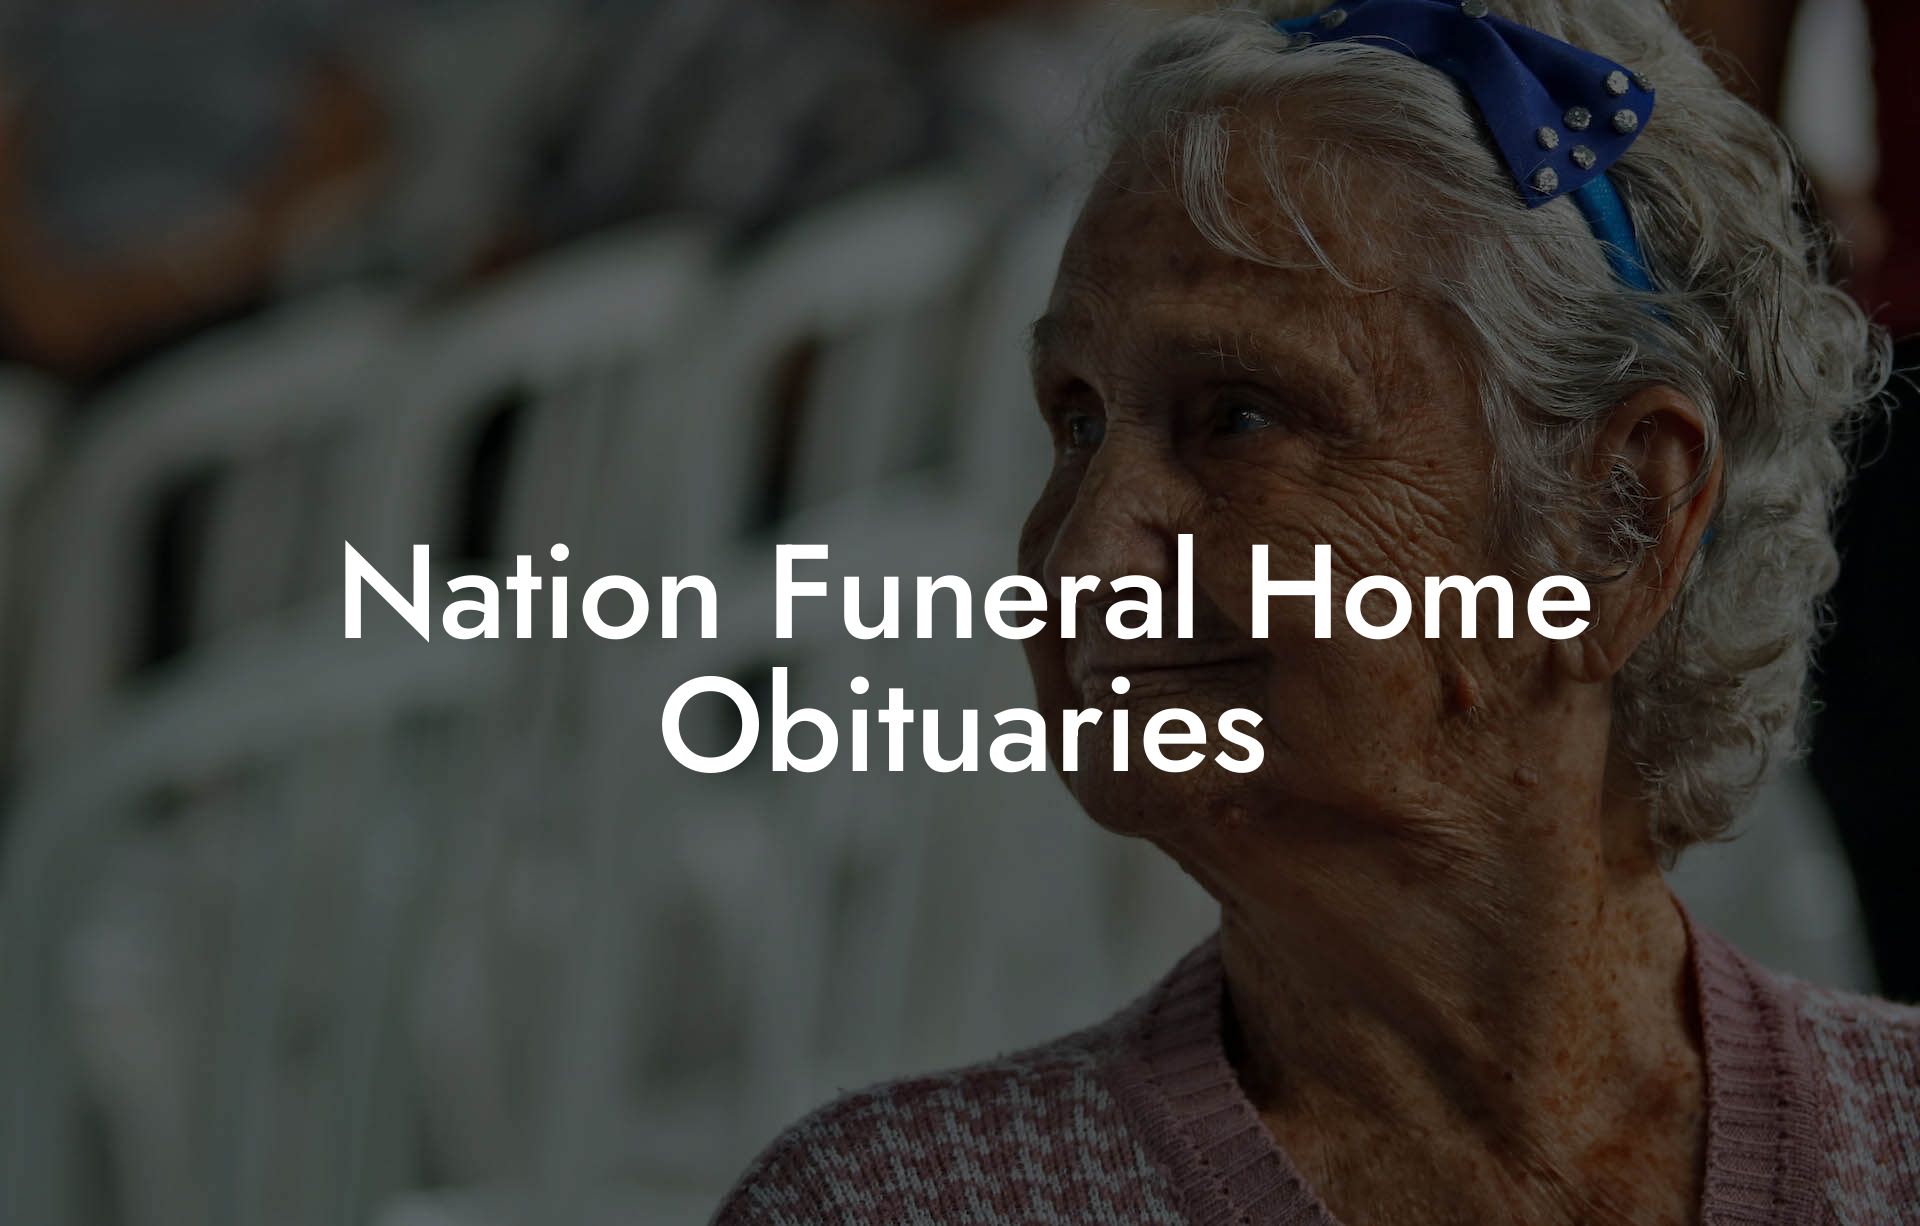 Nation Funeral Home Obituaries